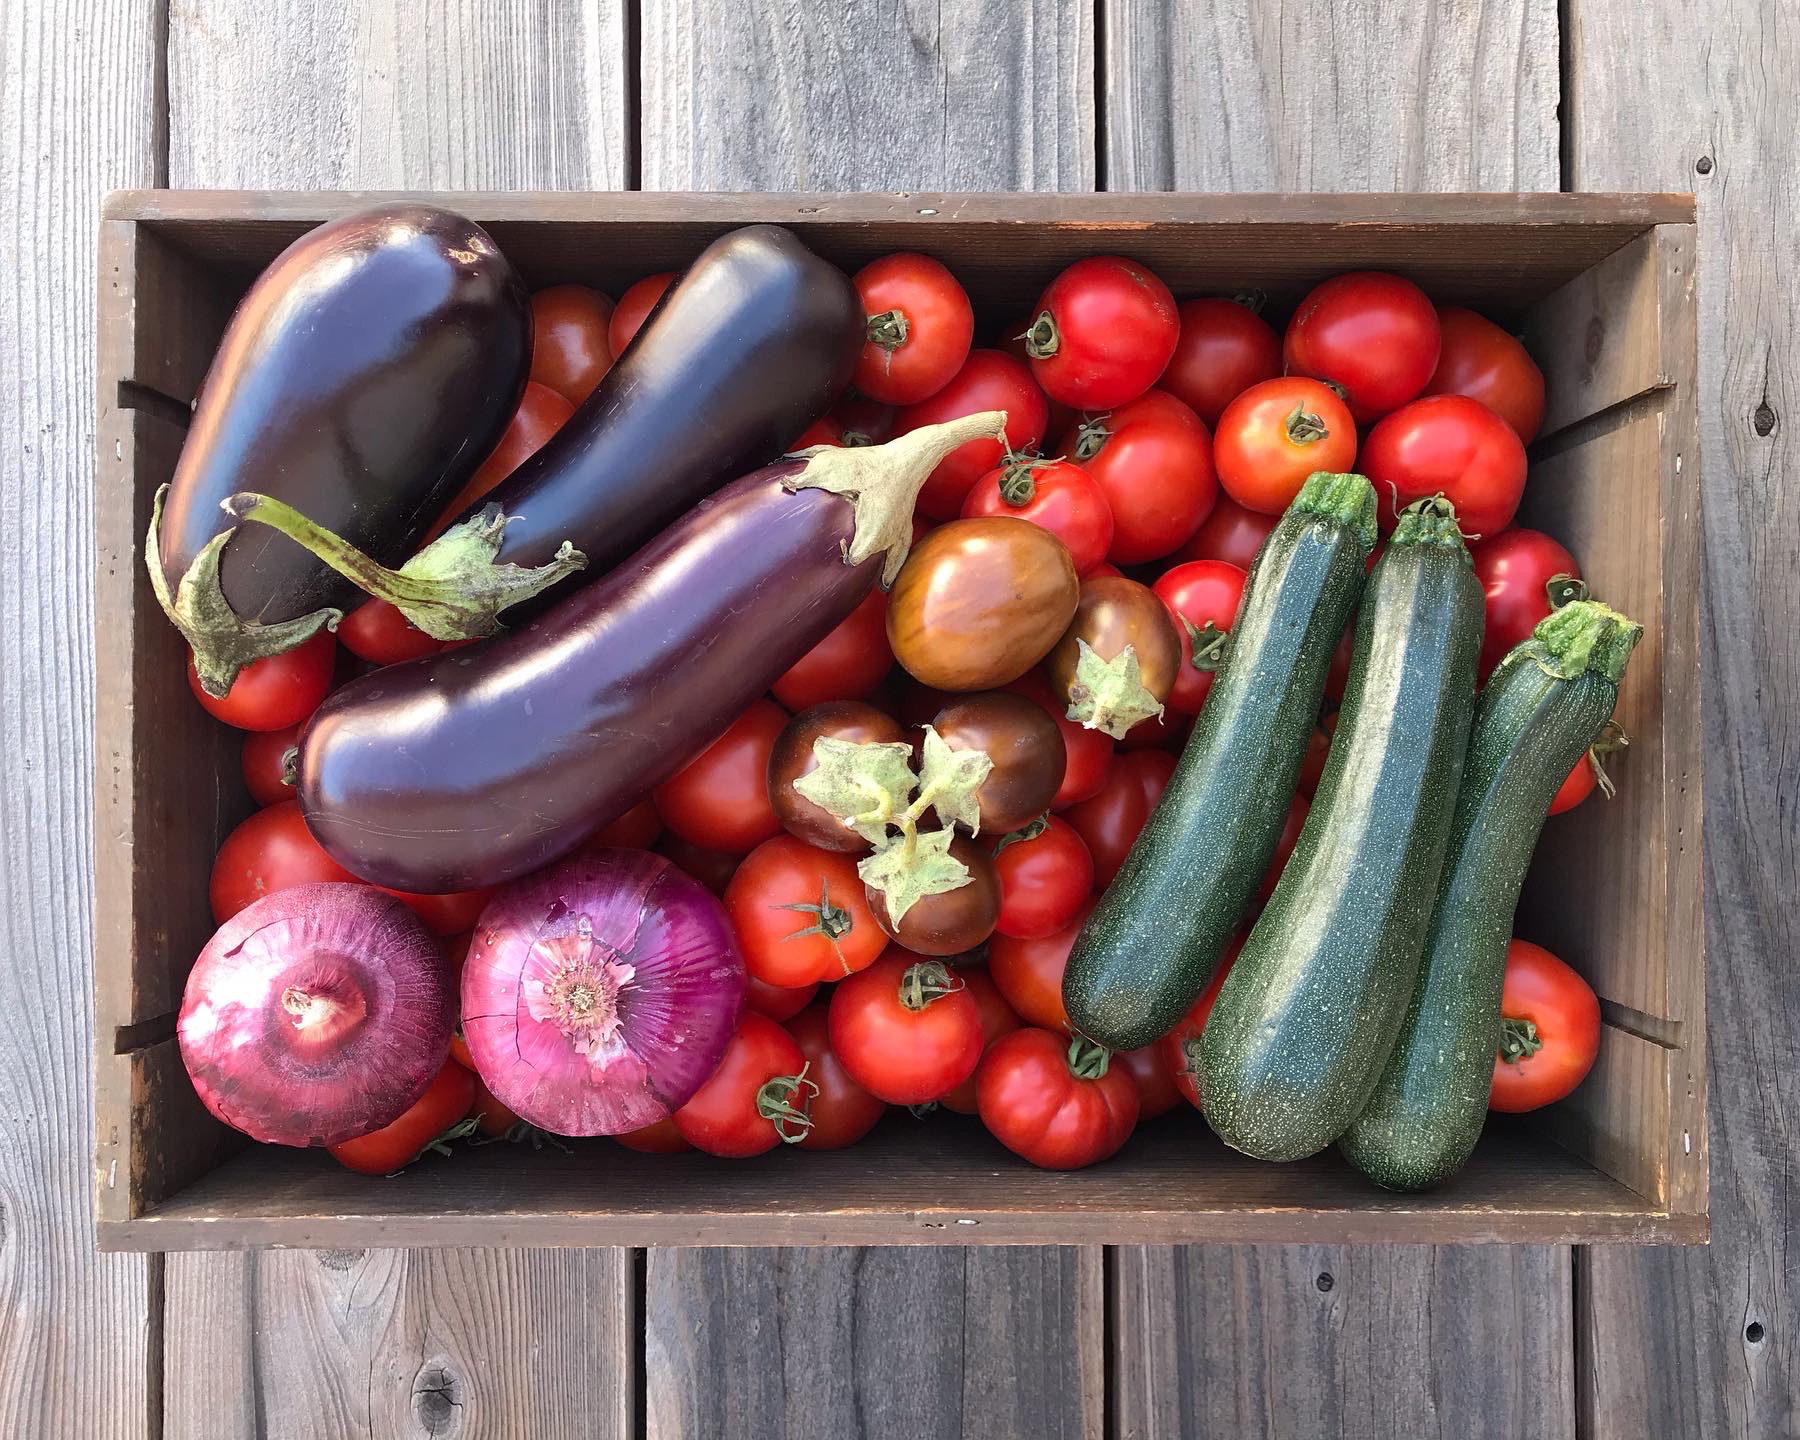 wooden crate filled with seasonal produce of tomatoes, eggplant, red onions and zucchini